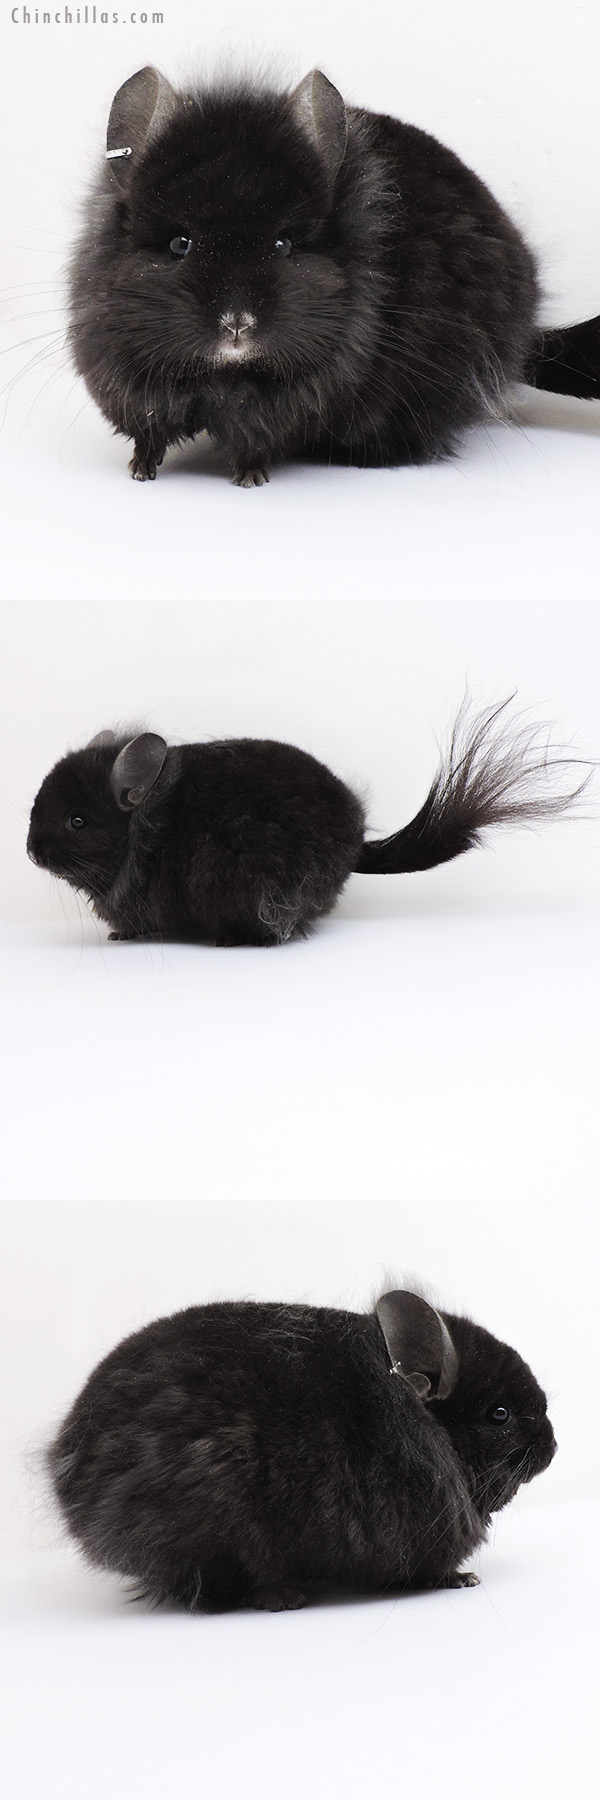 Chinchilla or related item offered for sale or export on Chinchillas.com - 19138 Exceptional Ebony ( Locken Carrier ) G2  Royal Persian Angora Male Chinchilla